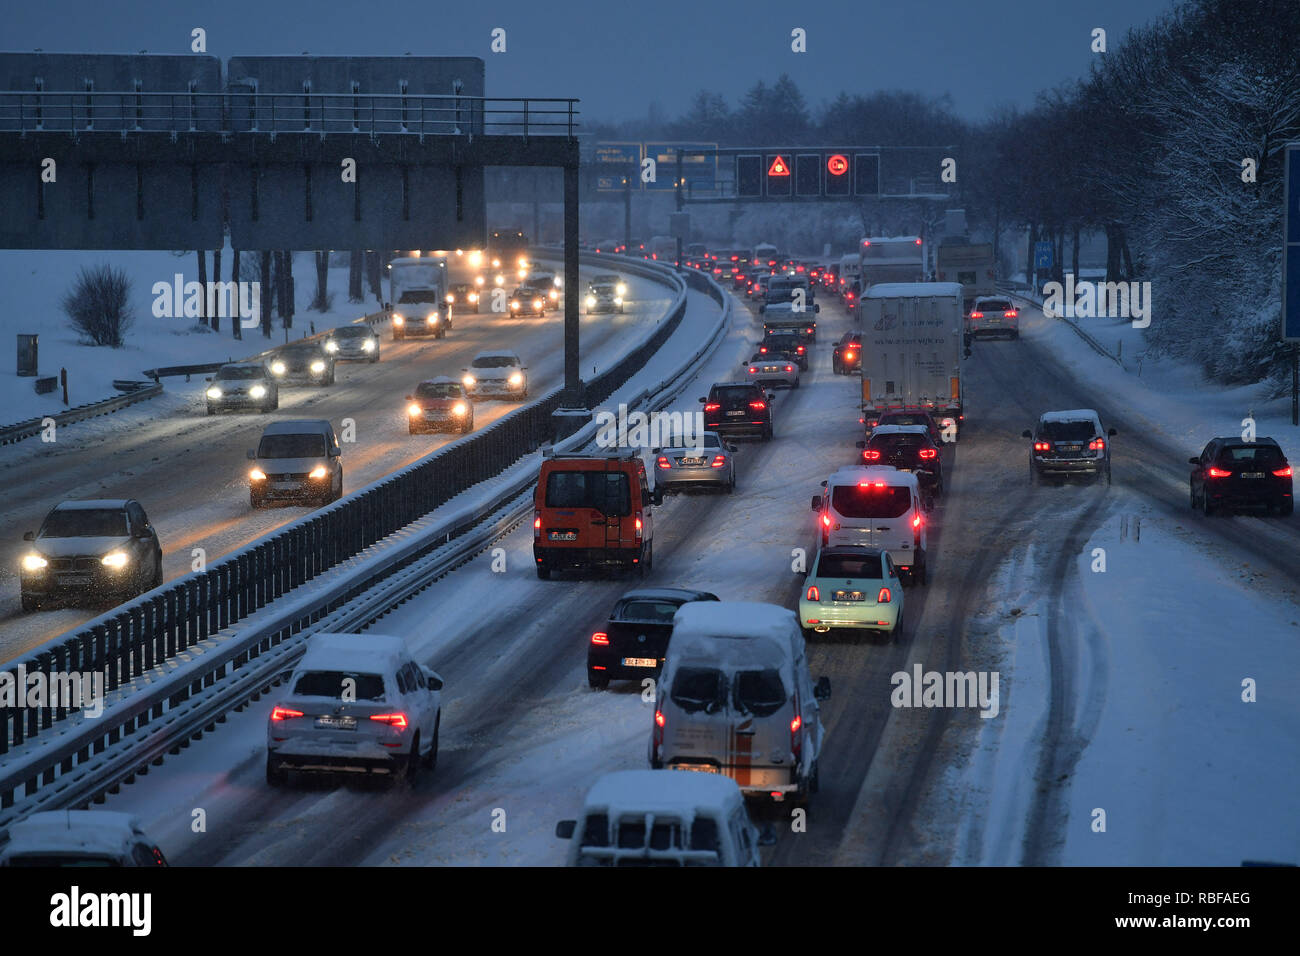 Munich Riem, Deutschland. 10th Jan, 2019. Snow chaos on the streets of Bavaria - as here on the A94 motorway in Muenchen Riem is the busy traffic, commuters in the morning on snow-slick streets. Cars, cars, PKSWs, driving on a snowy road, car traffic, road traffic, Autobahn.Berufsverkehr Continuing snowfall on 10.01.2019, provide for snow chaos, traffic chaos, winter onset in Bavaria. | usage worldwide Credit: dpa/Alamy Live News/Alamy Live News Stock Photo